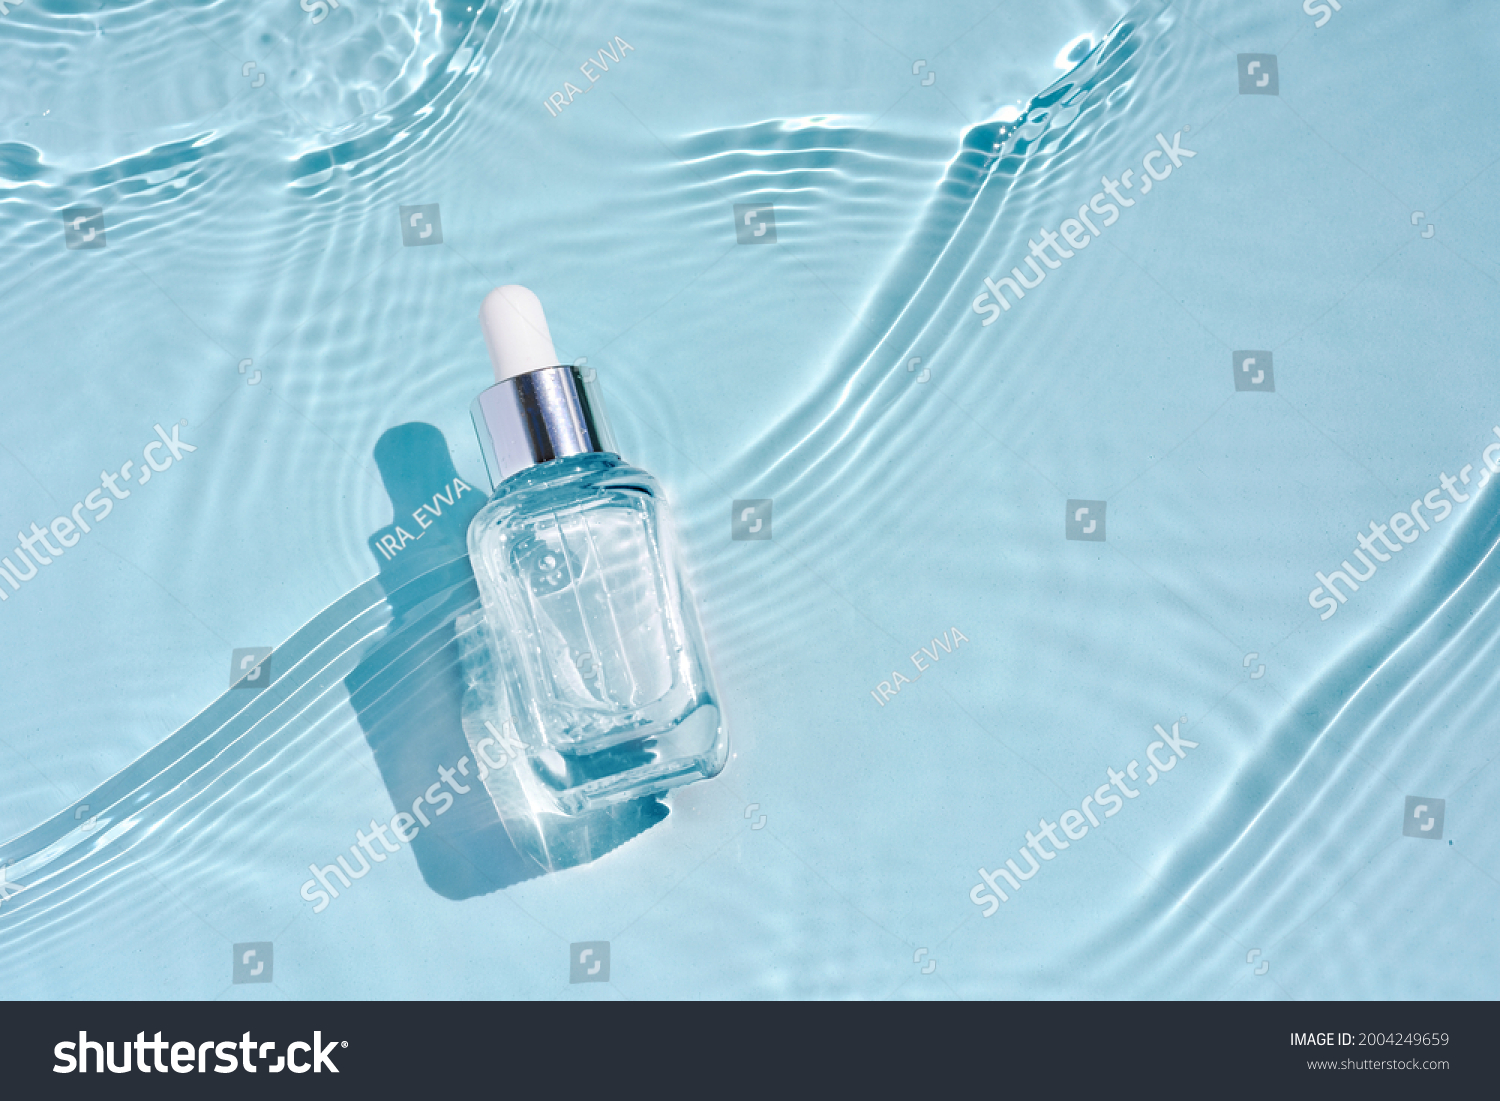 Cosmetic spa medical skincare, glass serum bottle with collagen on blue water background with waves. Advertising of medical product for anti-aging care, moisturizing and cleansing. #2004249659